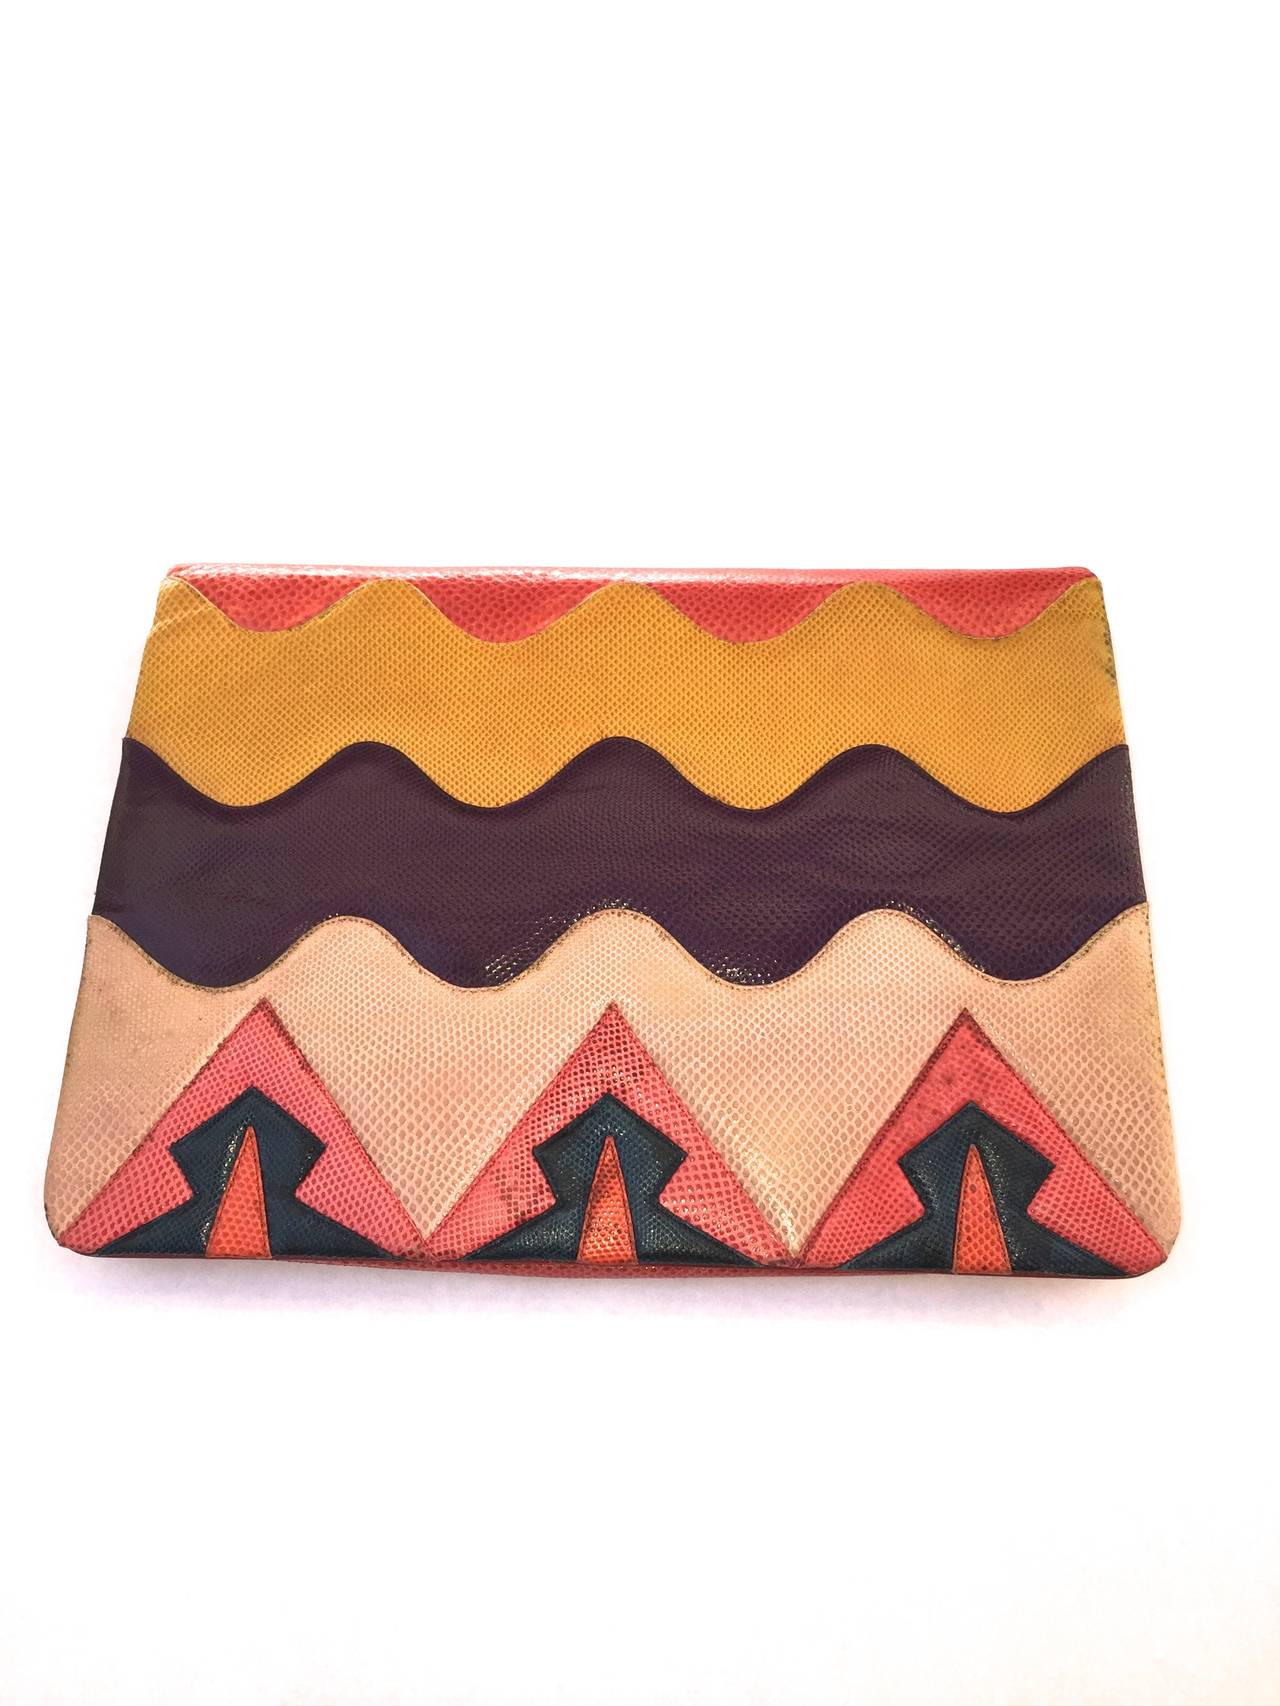 Judith Leiber 1980s geometric Karung clutch.
Bright spring / summer colors such as purple, yellow, pink, orange and red.
Missing the detachable shoulder strap but perfect as clutch.
There are two sections inside that are lined and the inside front